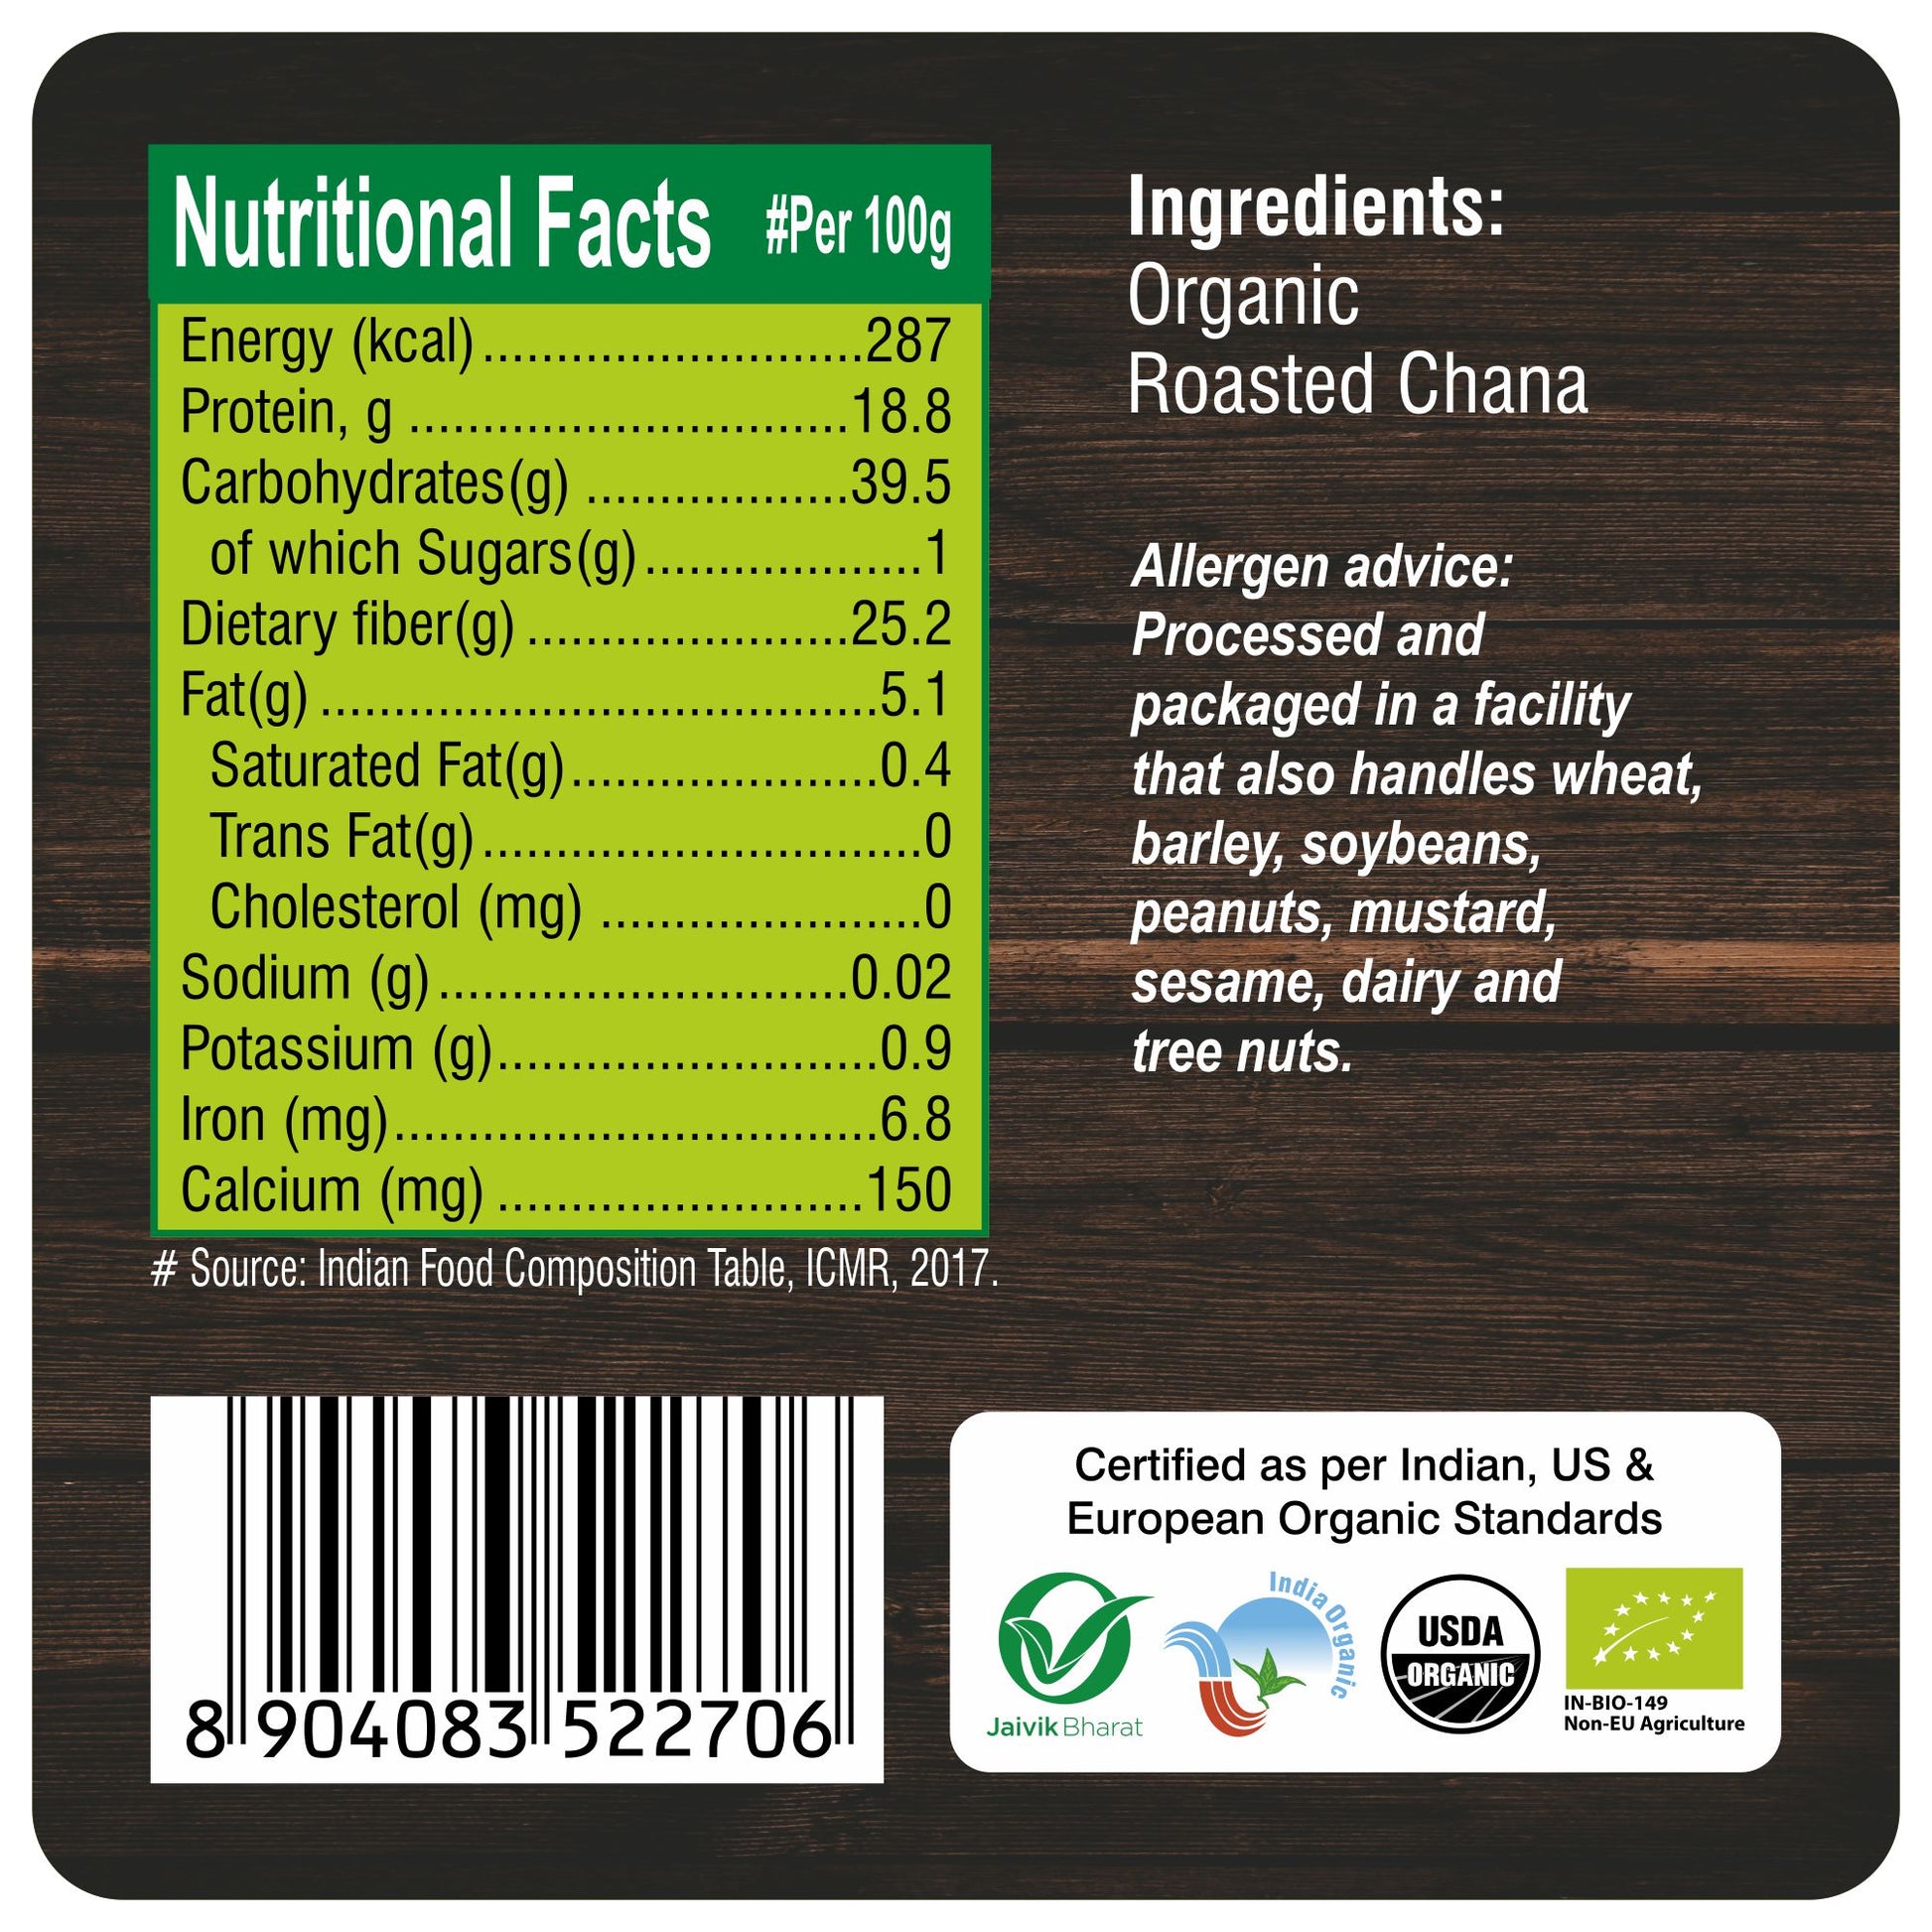 nutrition content - Organic Roasted Chana